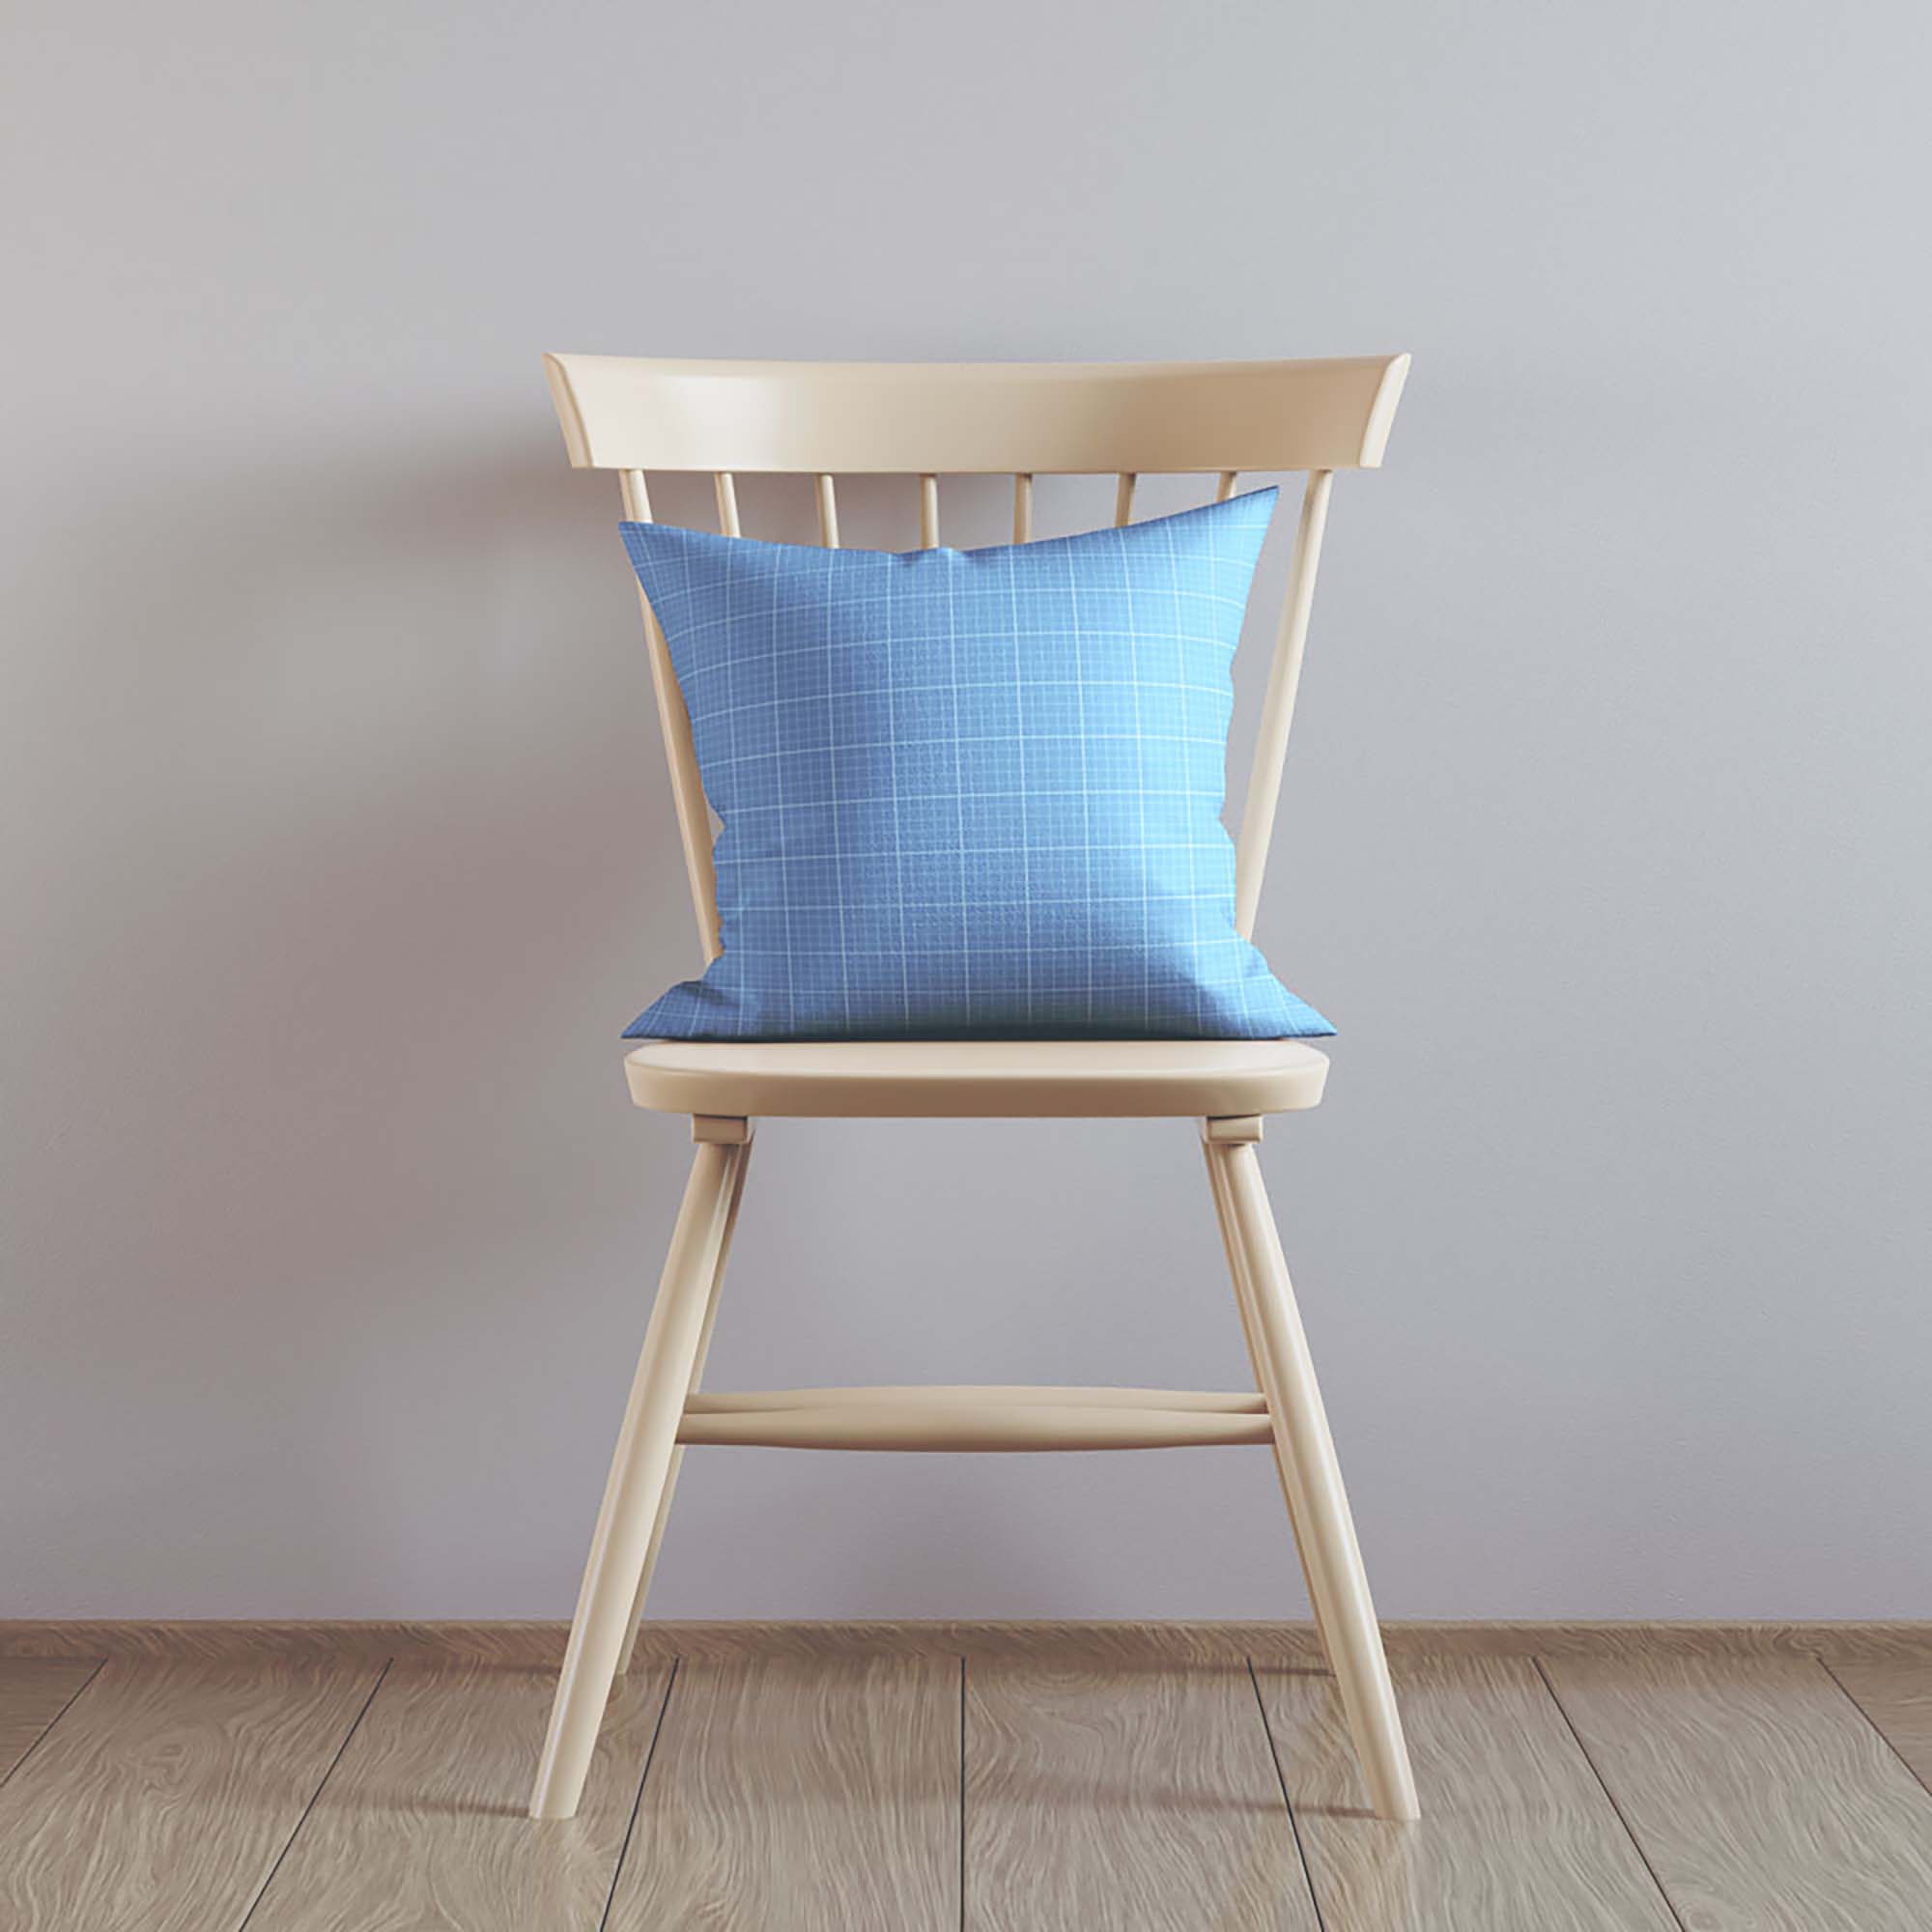 Classic Pillow on Chair Mockup